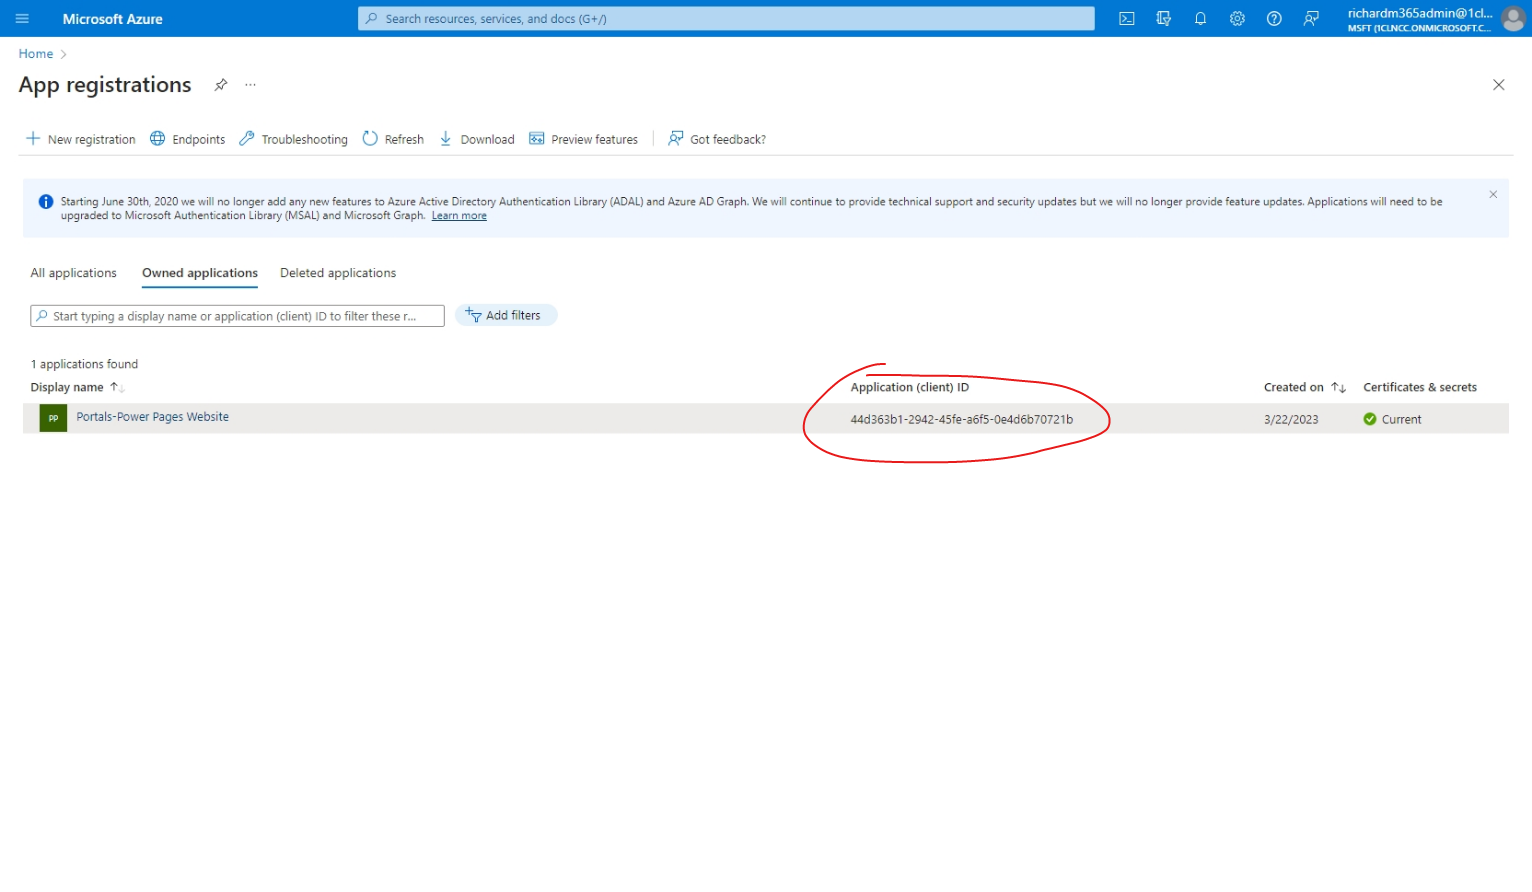 Azure app registrations list, with the Application (client) ID circled.